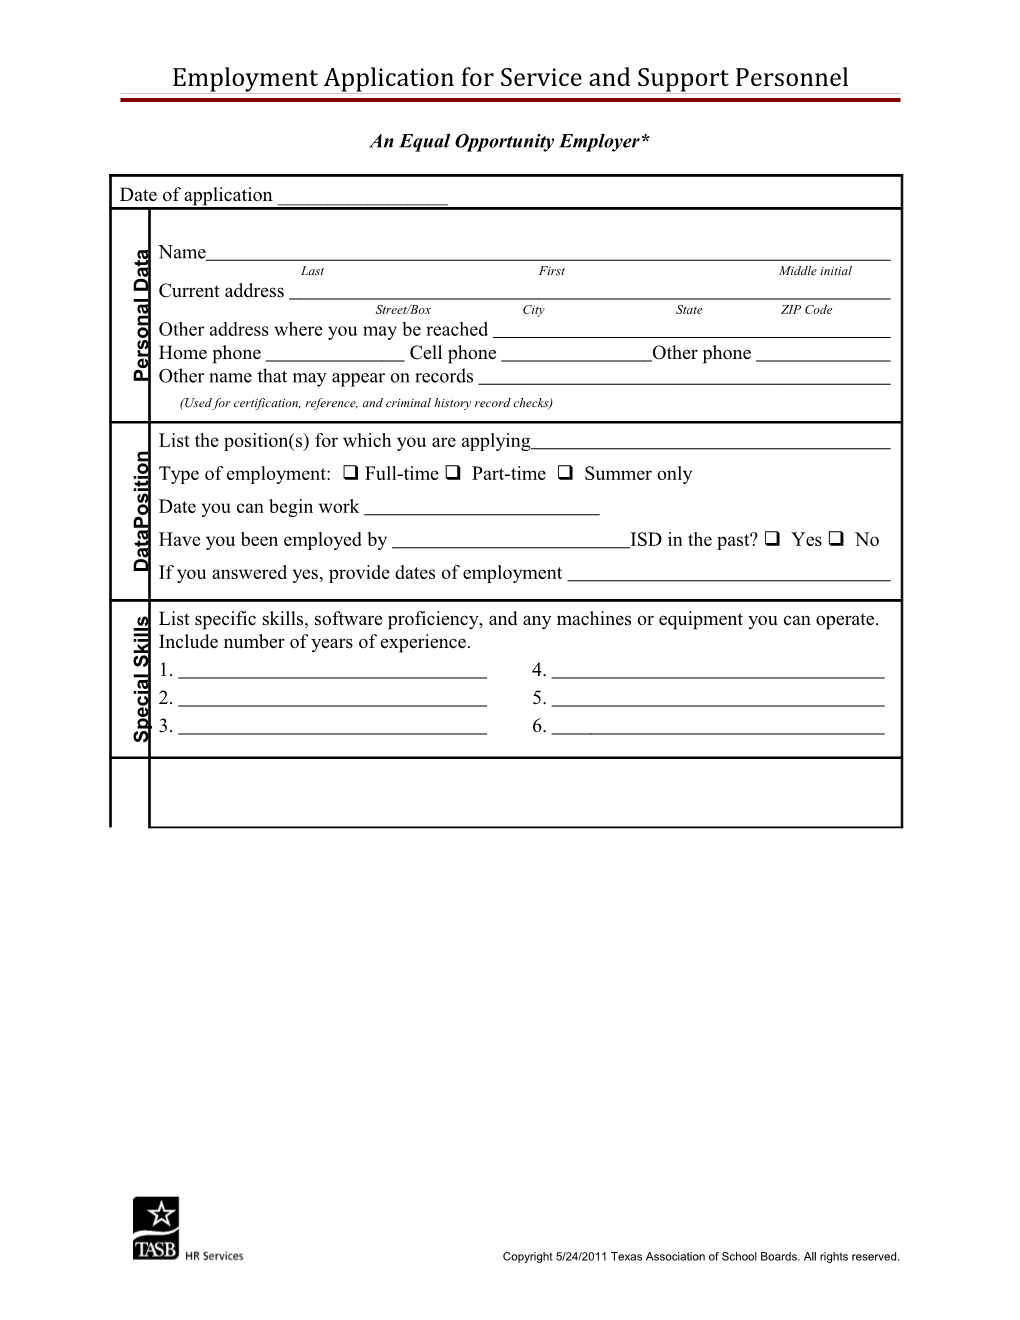 Employment Application for Service and Support Personnel